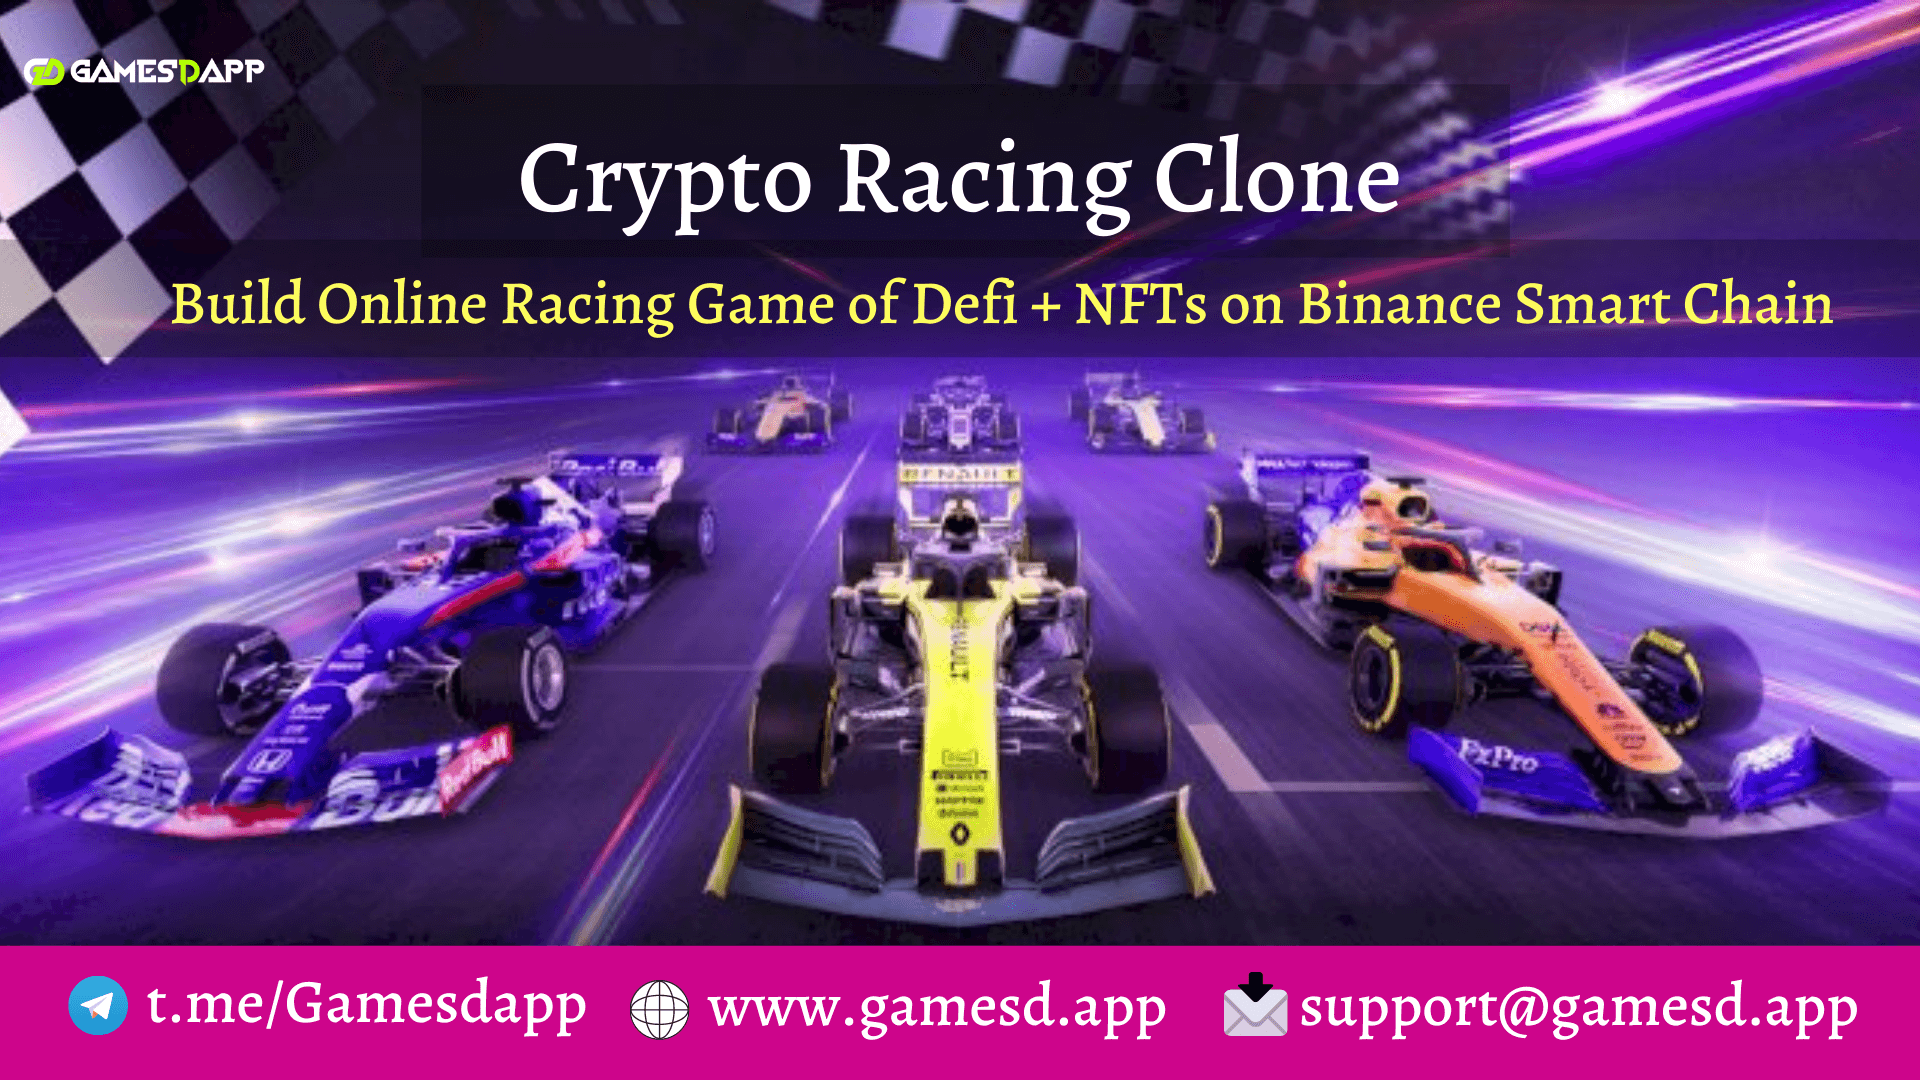 Crypto Racing Clone - To Launch Multiplayer Racing Game of DeFi + NFTs based on BSC